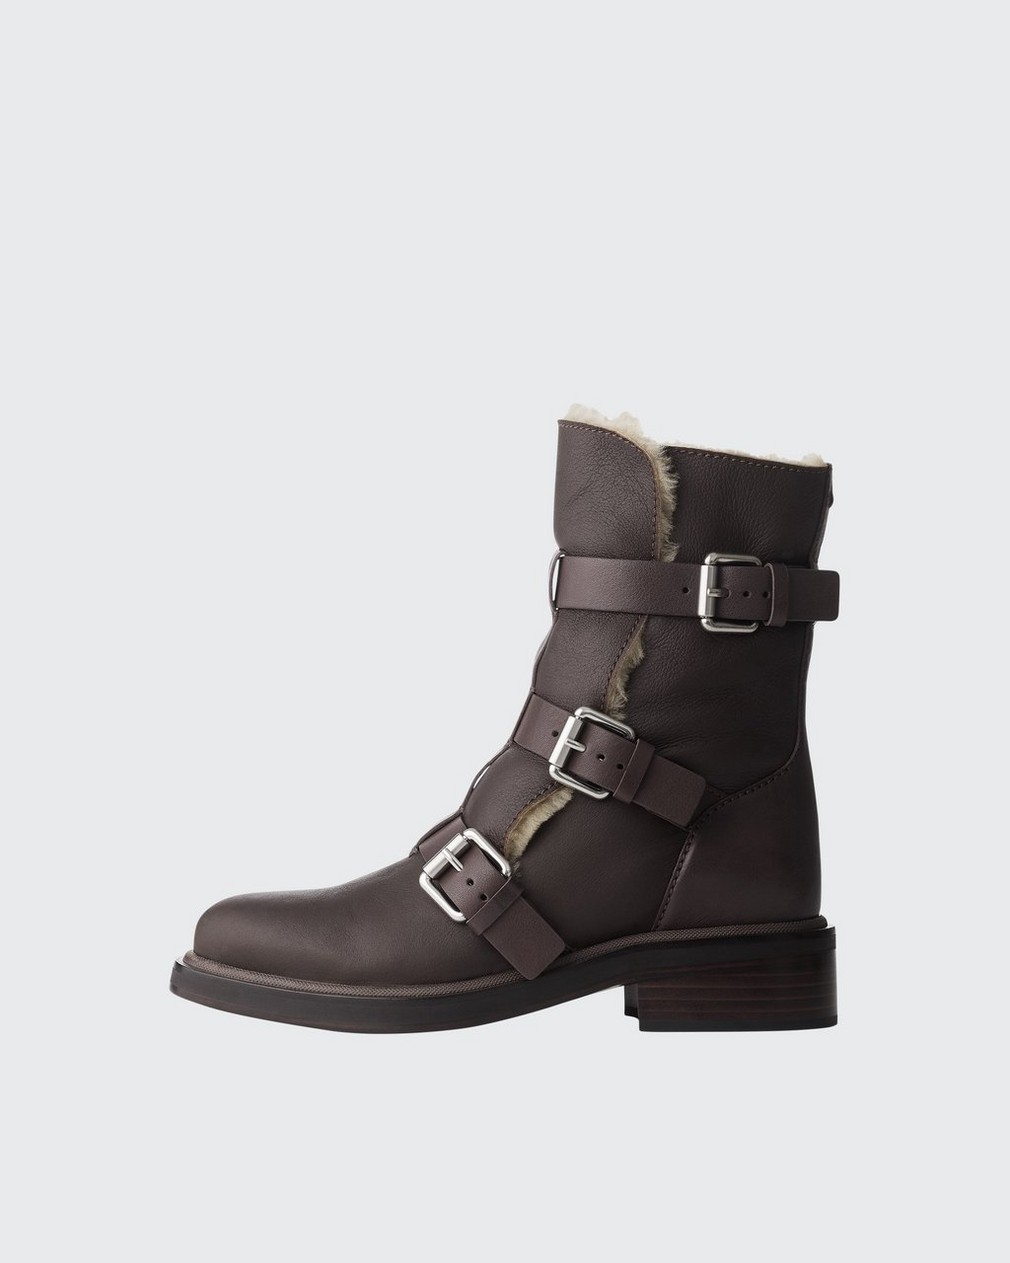 RB Moto Buckle Boot - Leather & Shearling